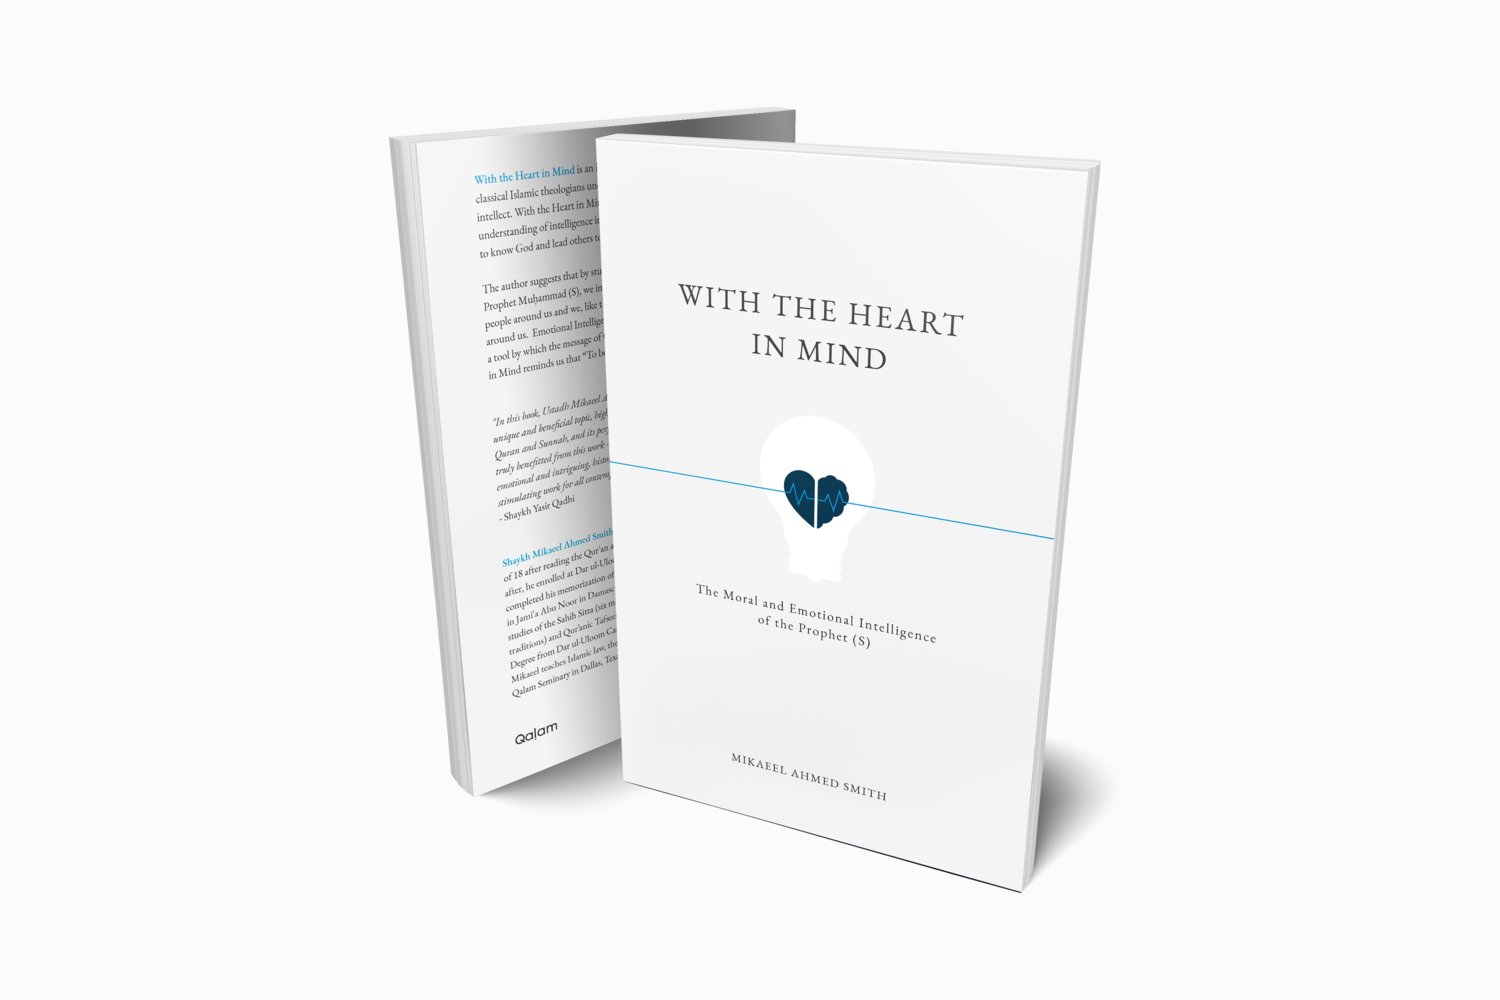 With The Heart in Mind: The Moral and Emotional Intelligence of the Prophet (S)